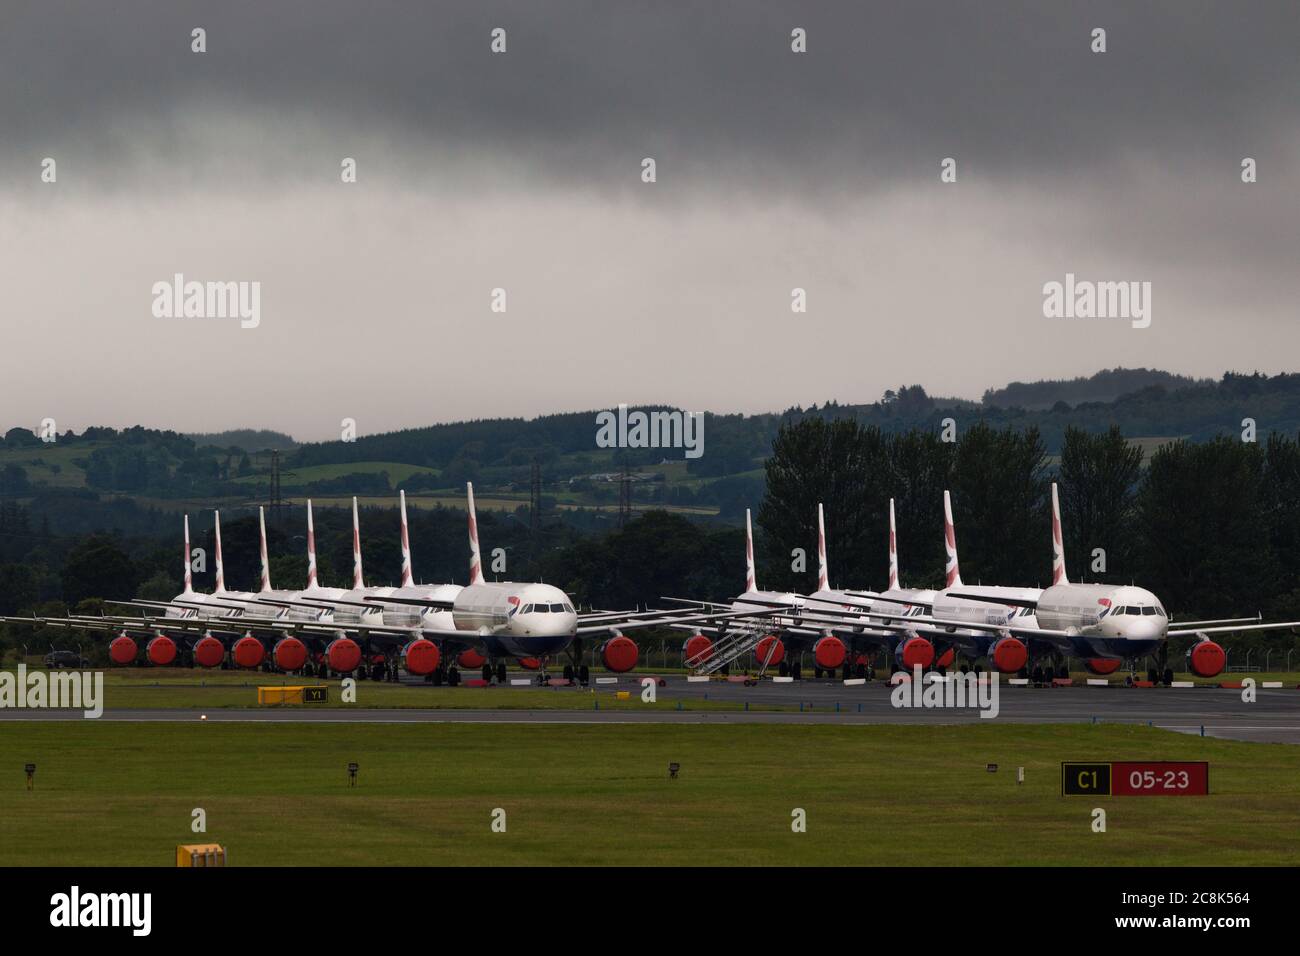 Glasgow, Scotland, UK. 23 July 2020. Pictured: Under a threatening dark stormy cloud, grounded British Airways (BA) Airbus A319/A320/A321 aircraft sit the second runway of Glasgow Airport awaiting their fate of being sold off or put in storage.  Since March these planes have been sitting idle on the the airports tarmac, doe to the global coronavirus (COVID19) crisis.  British Airways have cut almost 12,000 staff, and to date have retired their whole Boeing 747 fleet in a bid to cut operating costs. Credit: Colin Fisher/Alamy Live News. Stock Photo